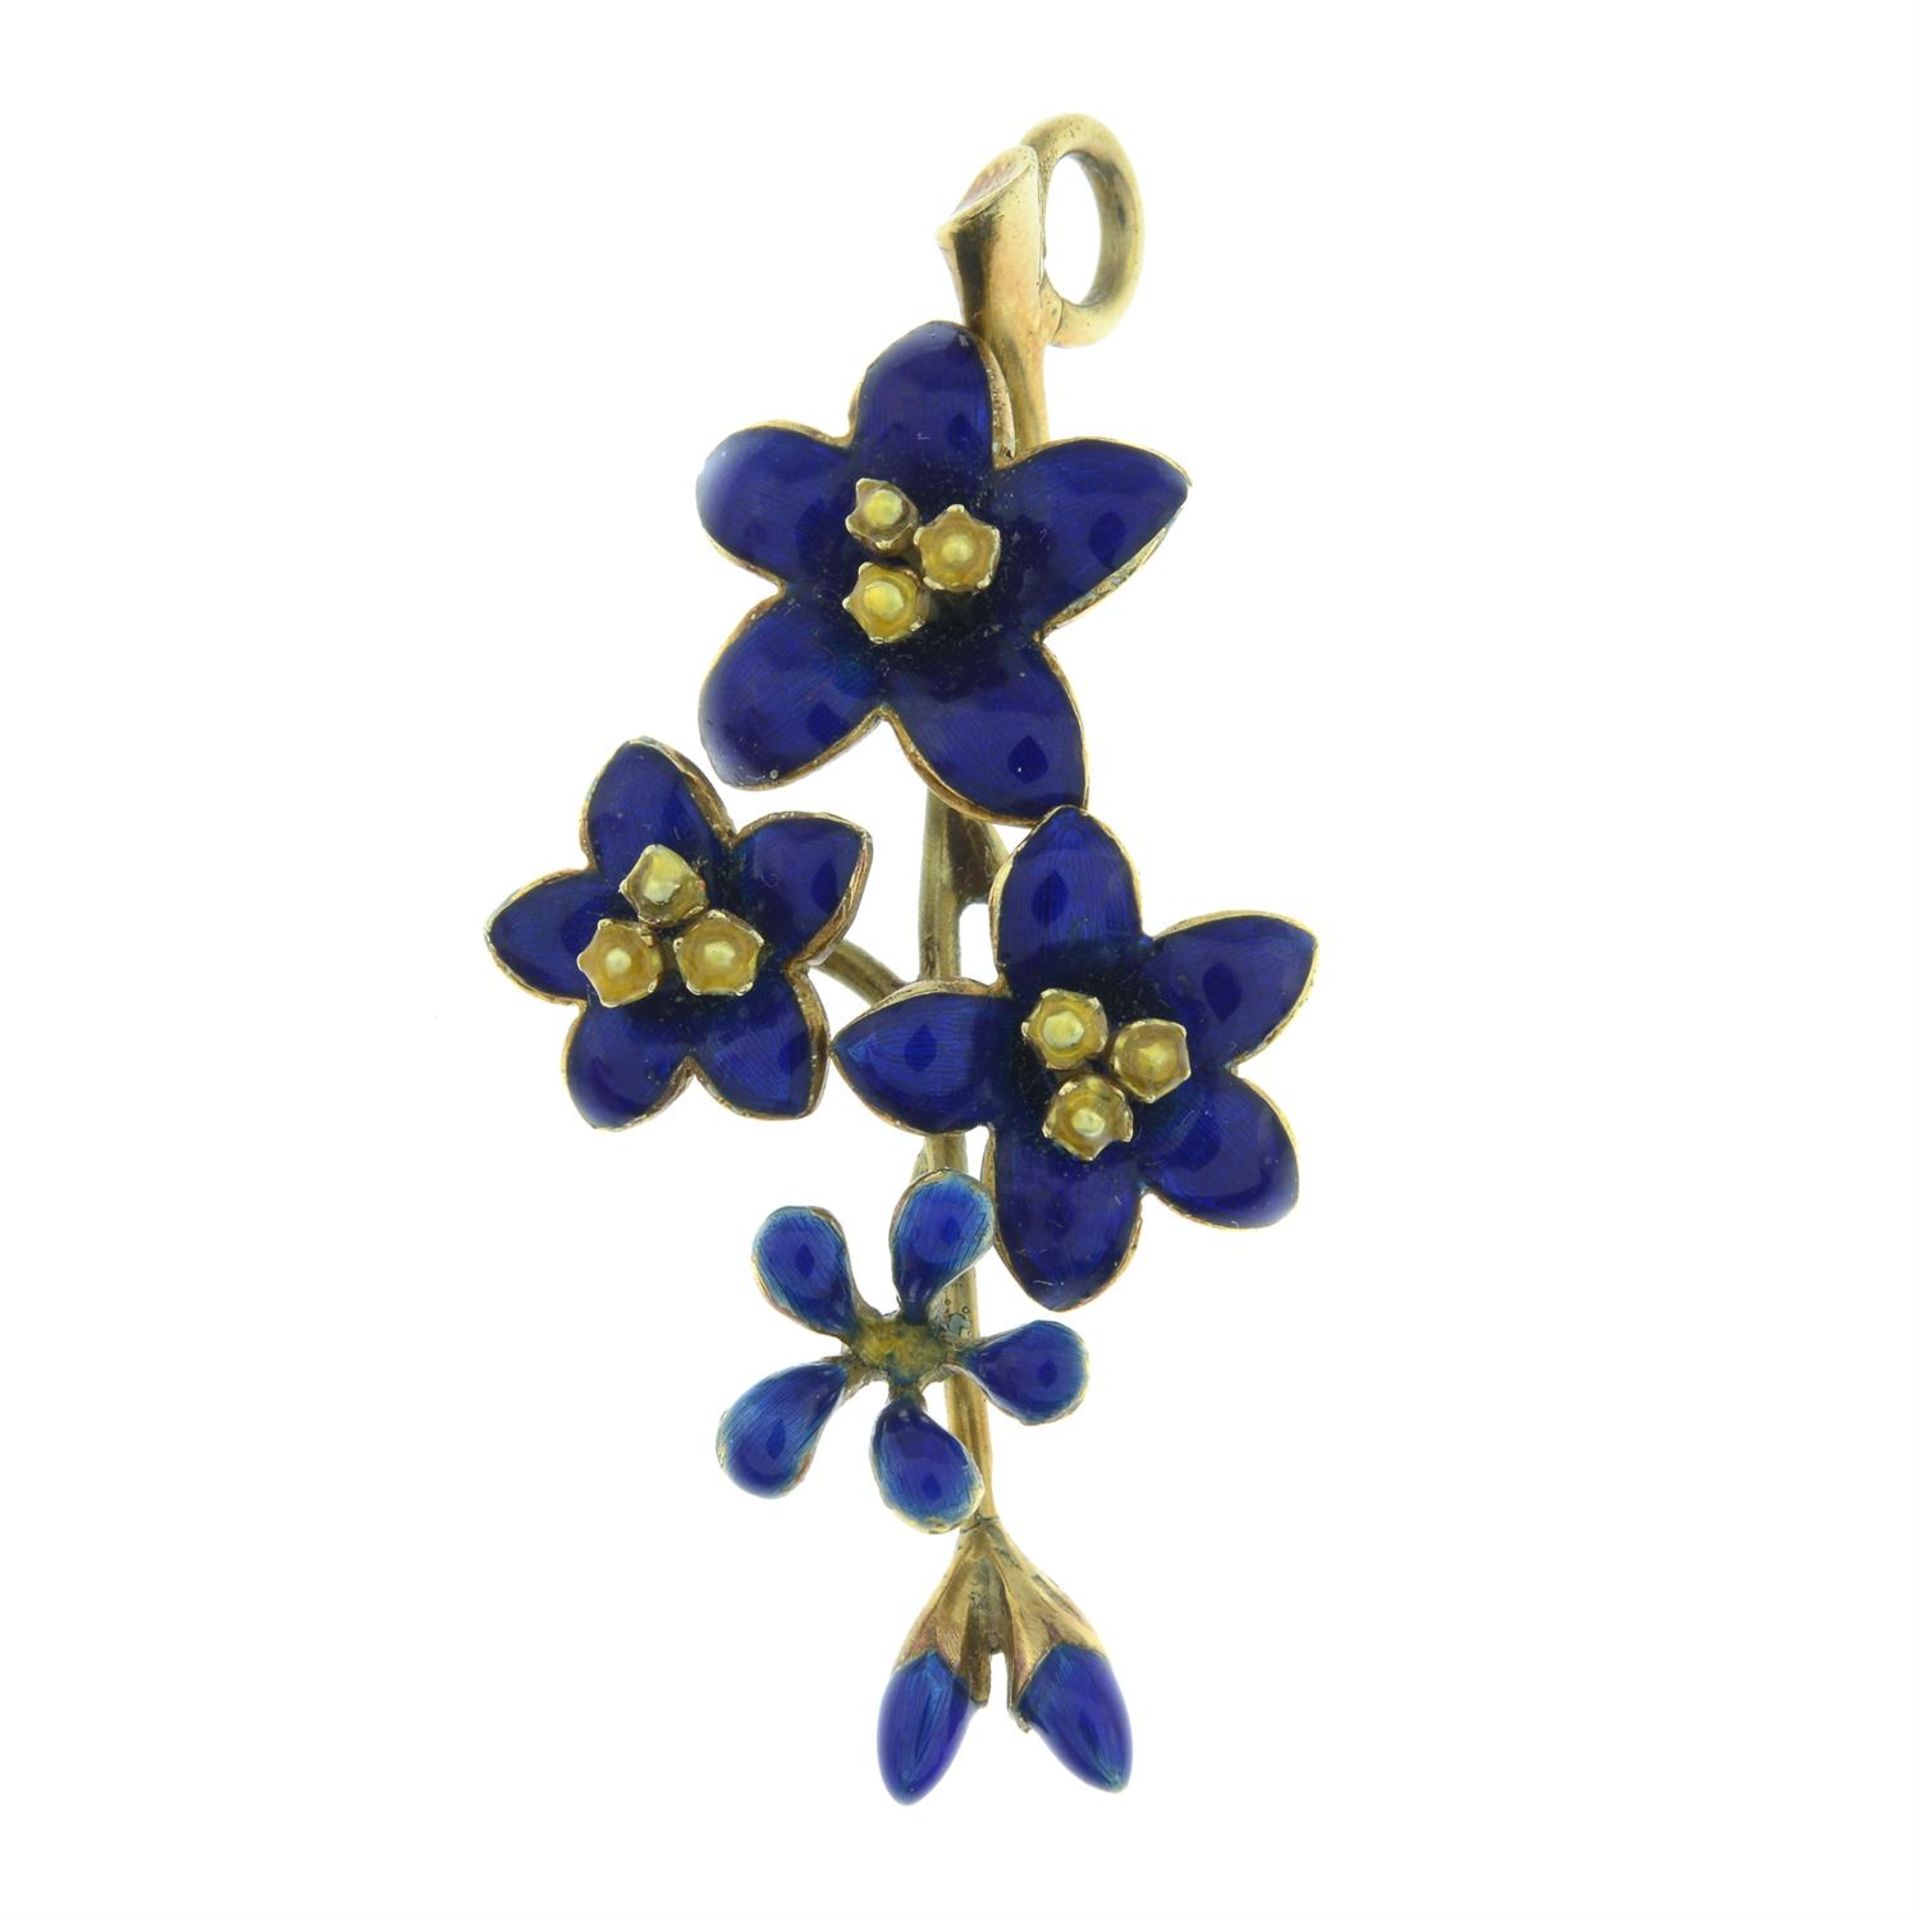 A mid 20th century 18ct gold blue enamel floral brooch, by Tiffany & Co.